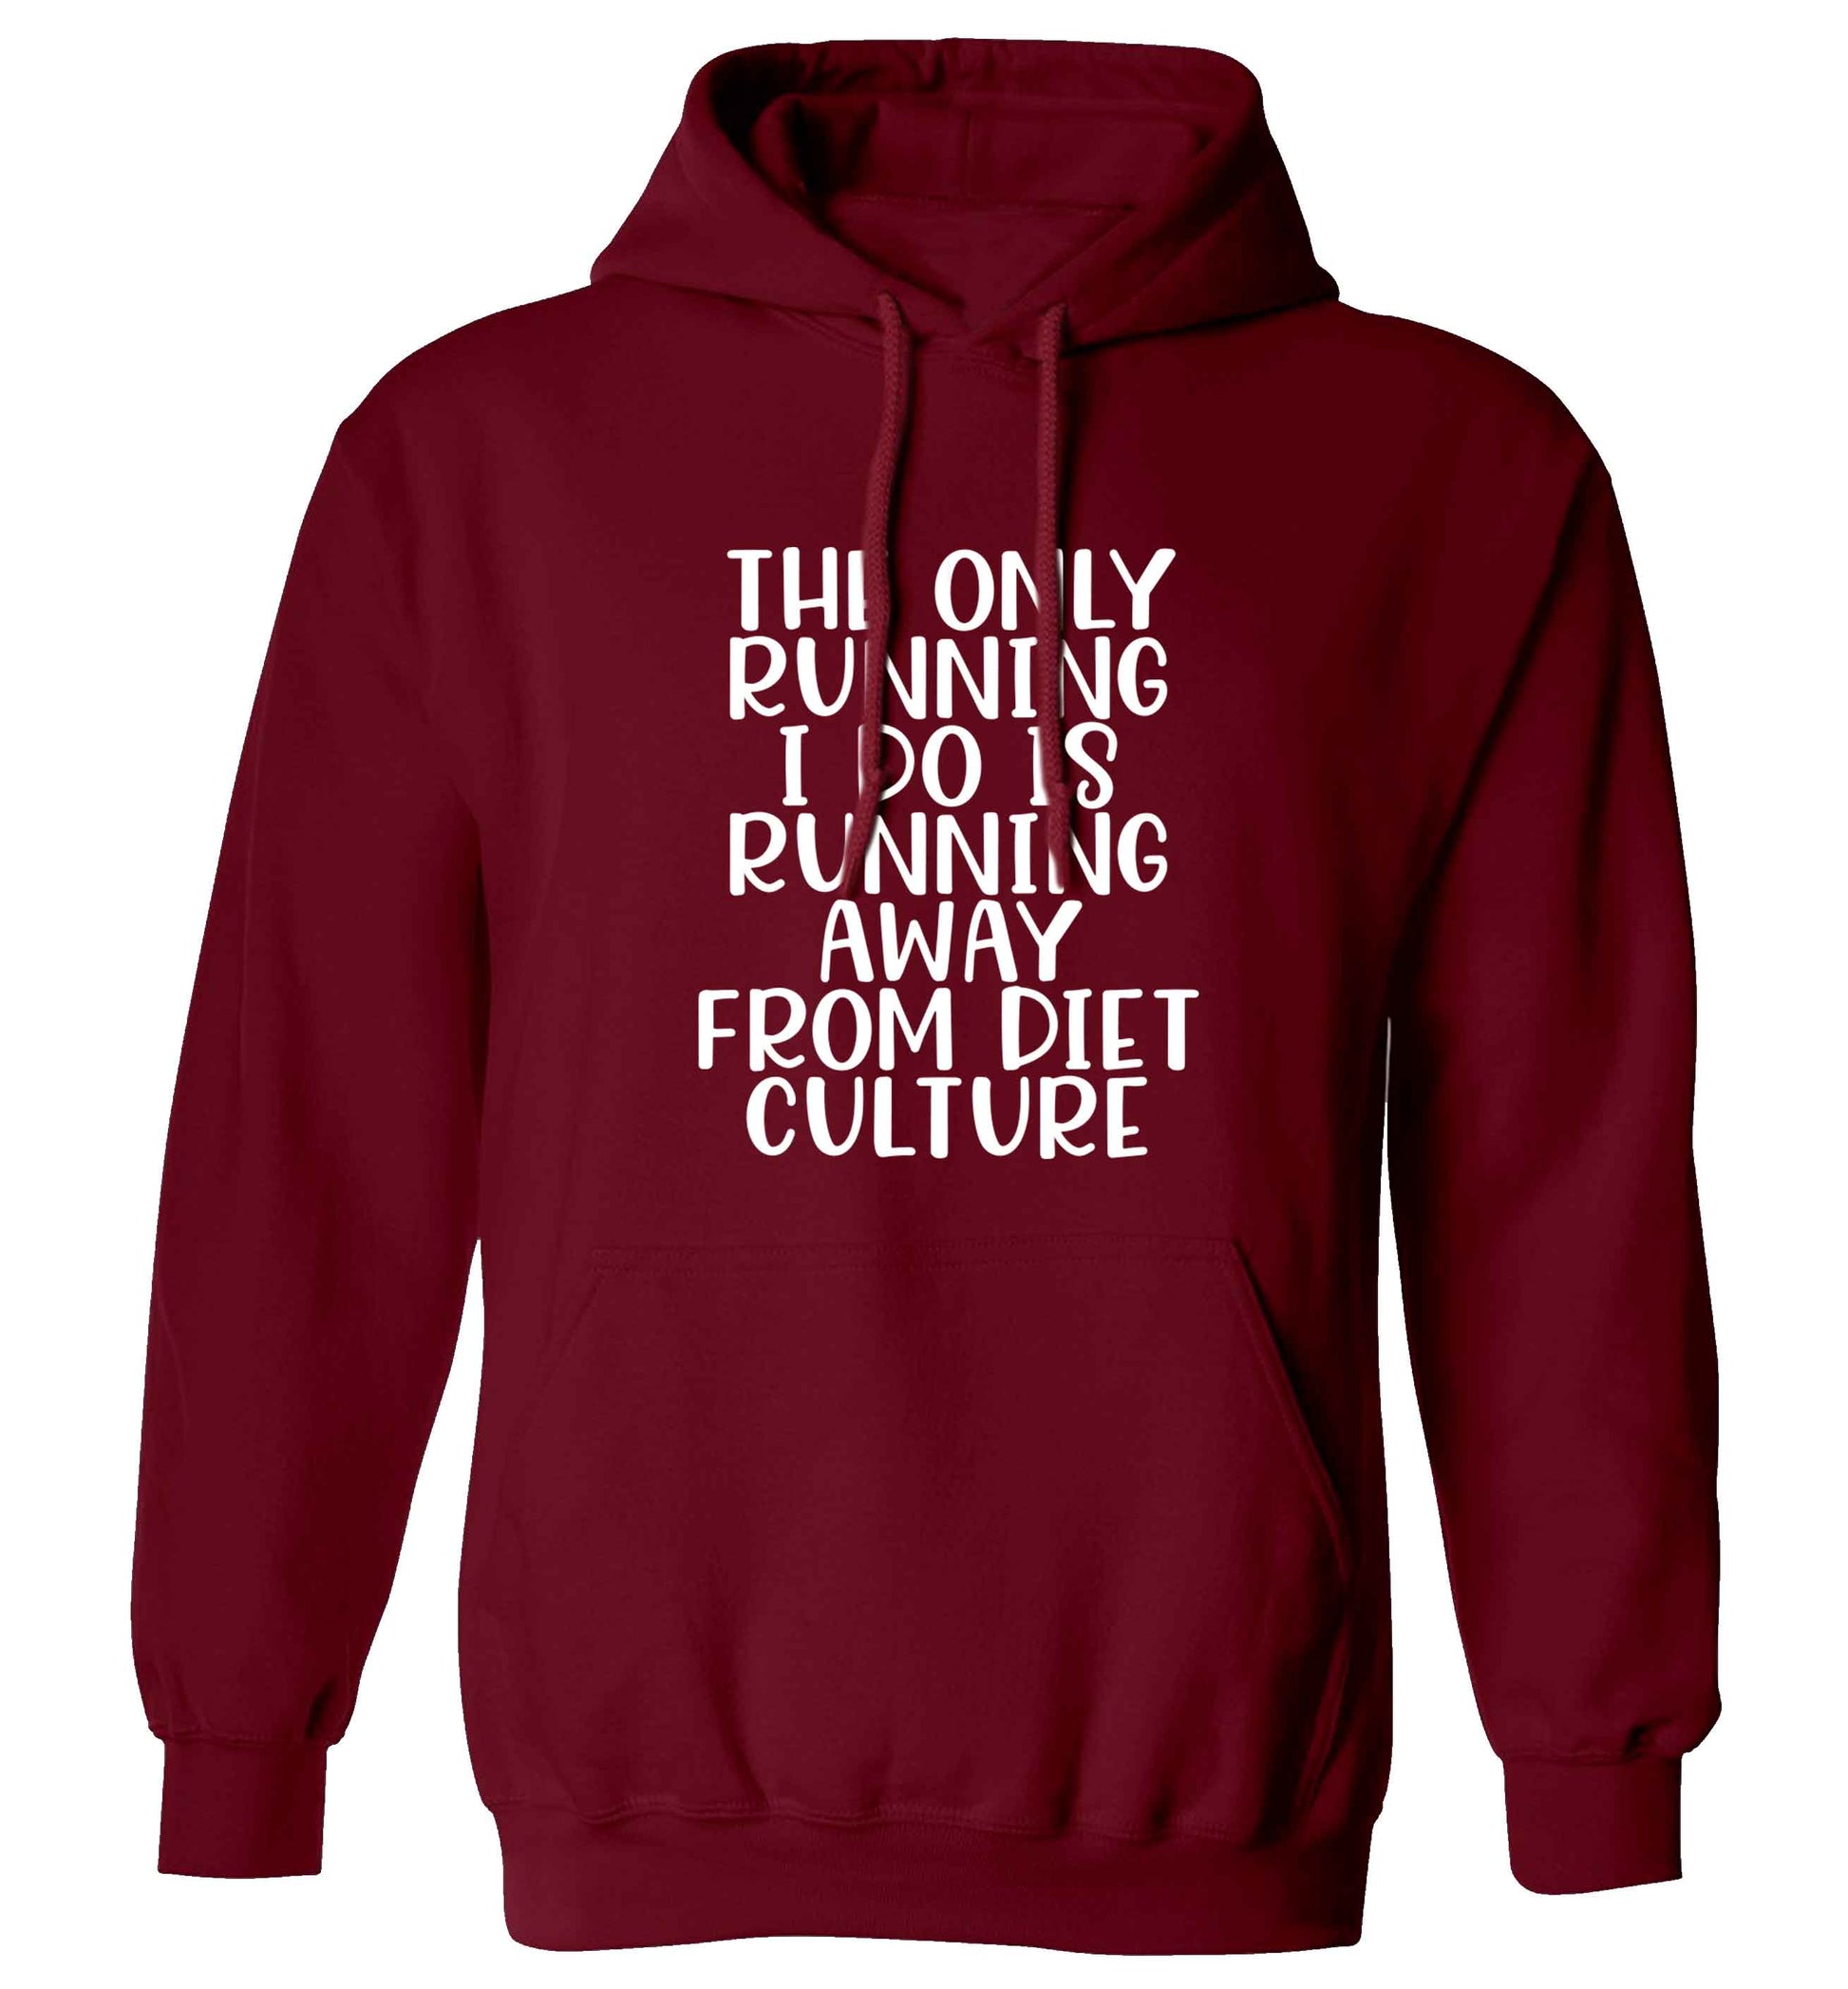 The only running I do is running away from diet culture adults unisex maroon hoodie 2XL